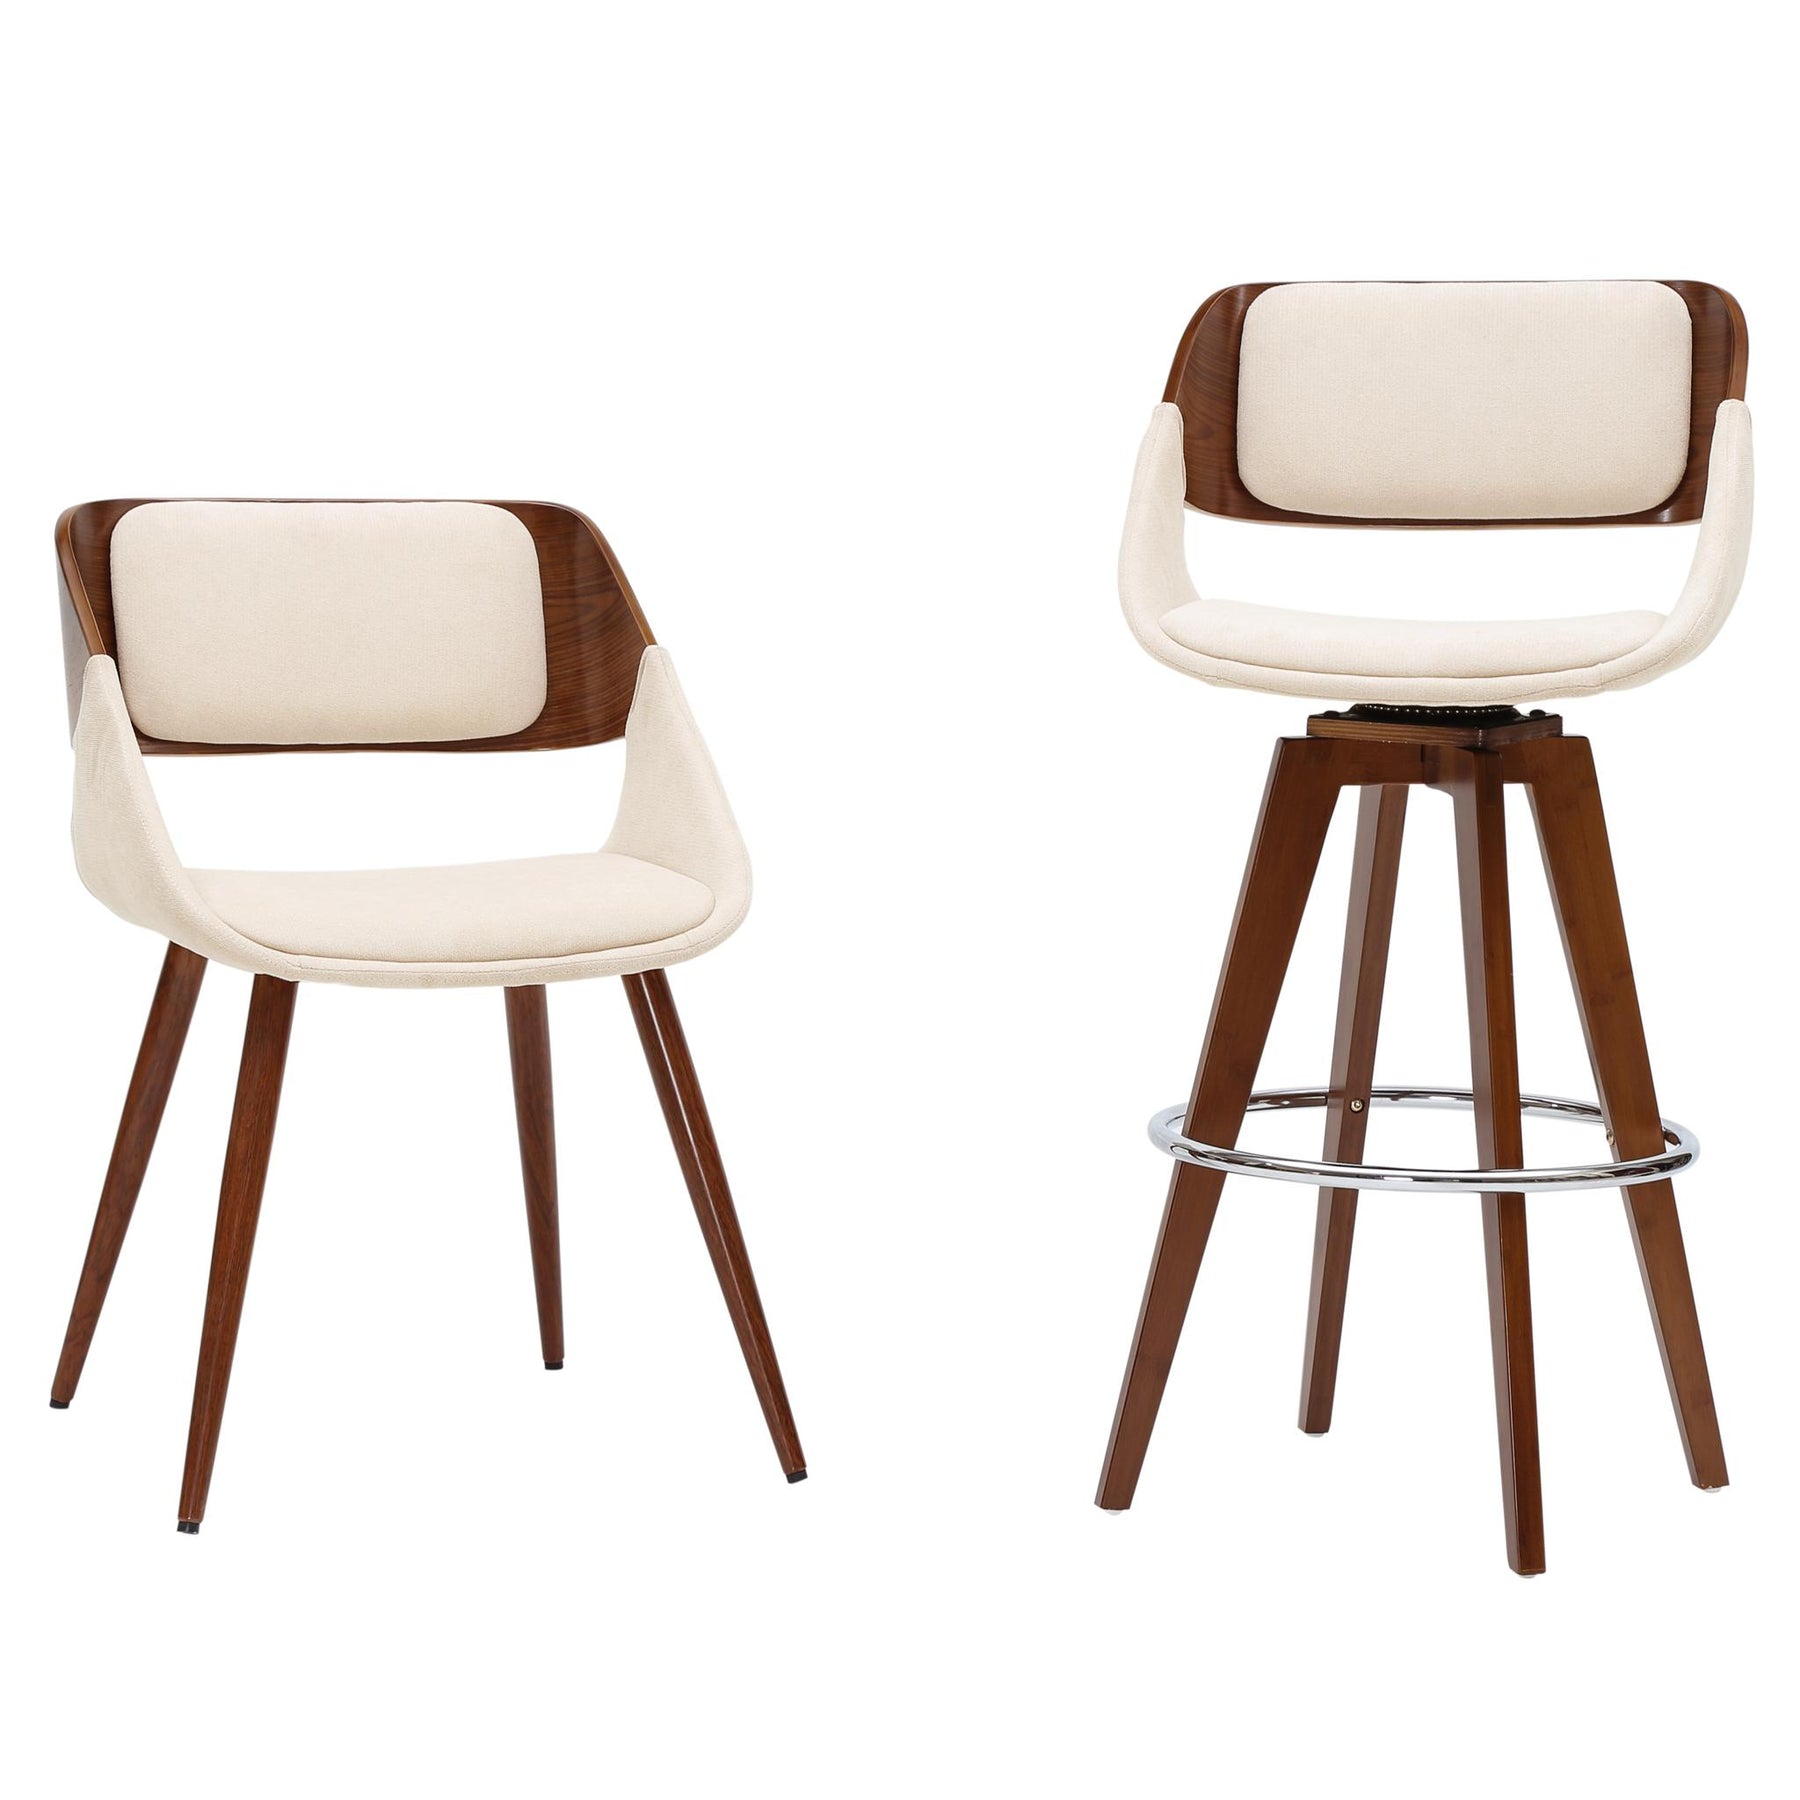 Cyprus Swivel Fabric Bar Stool by New Pacific Direct - 1160004